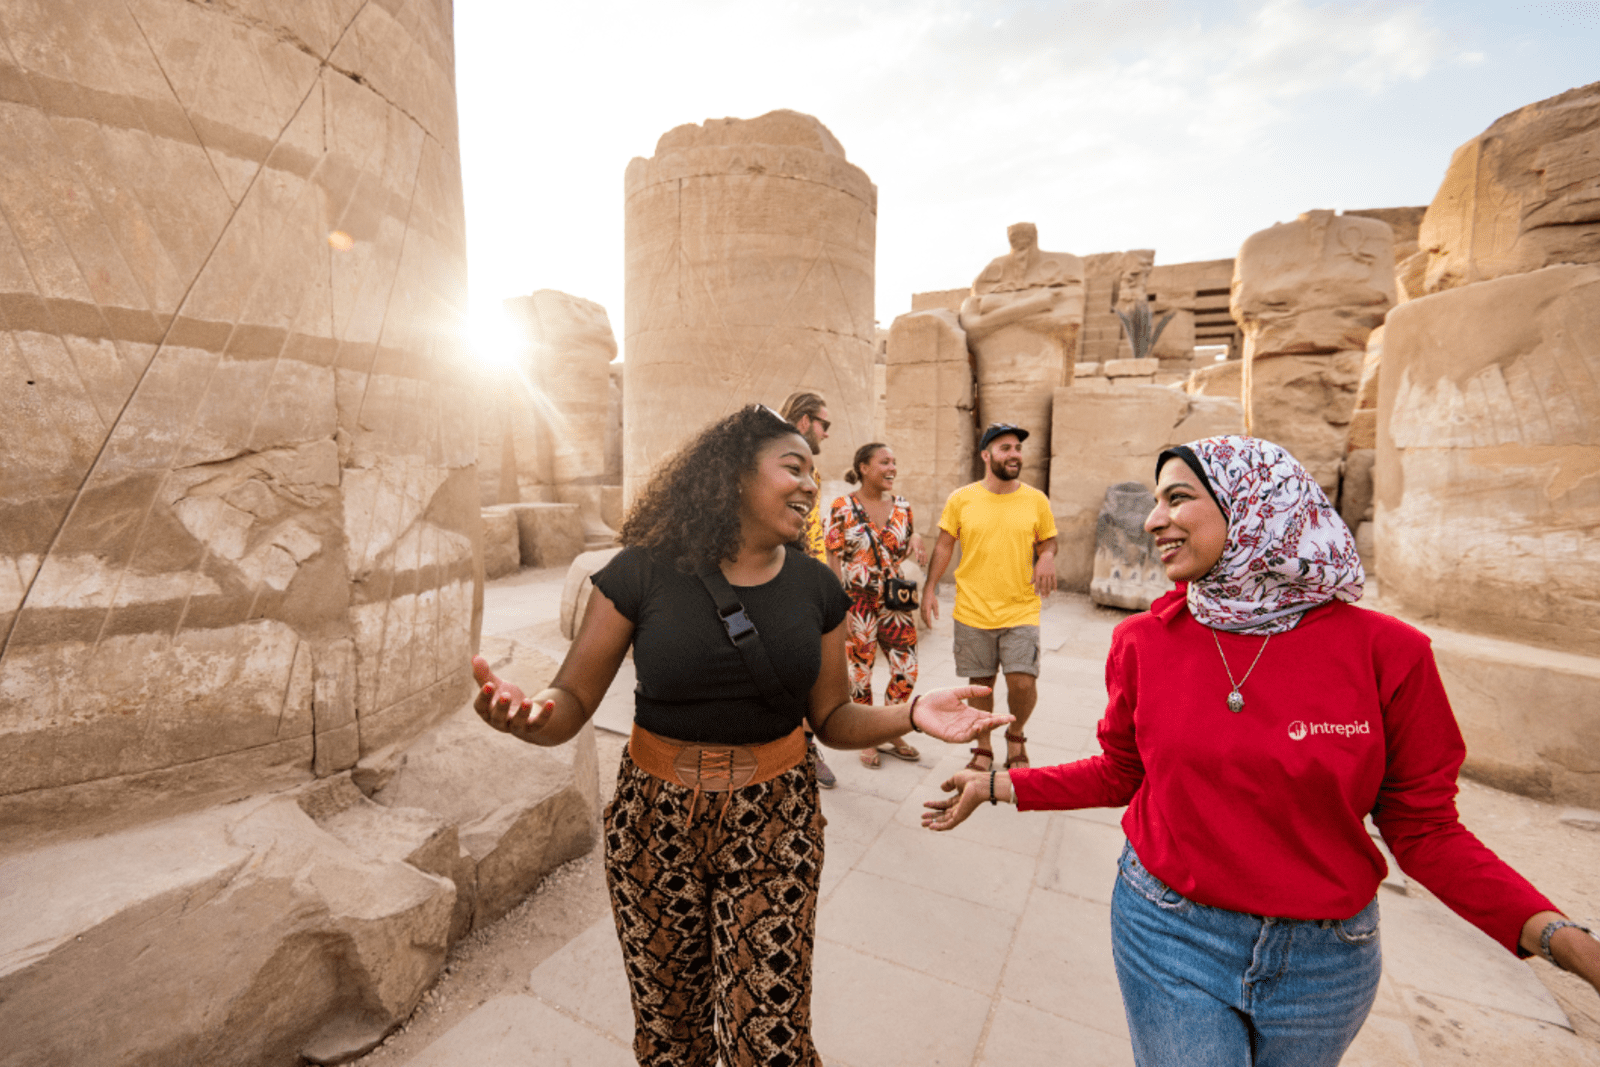 An Intrepid guide exploring one of Egypt's many ancient wonders with a group of travellers